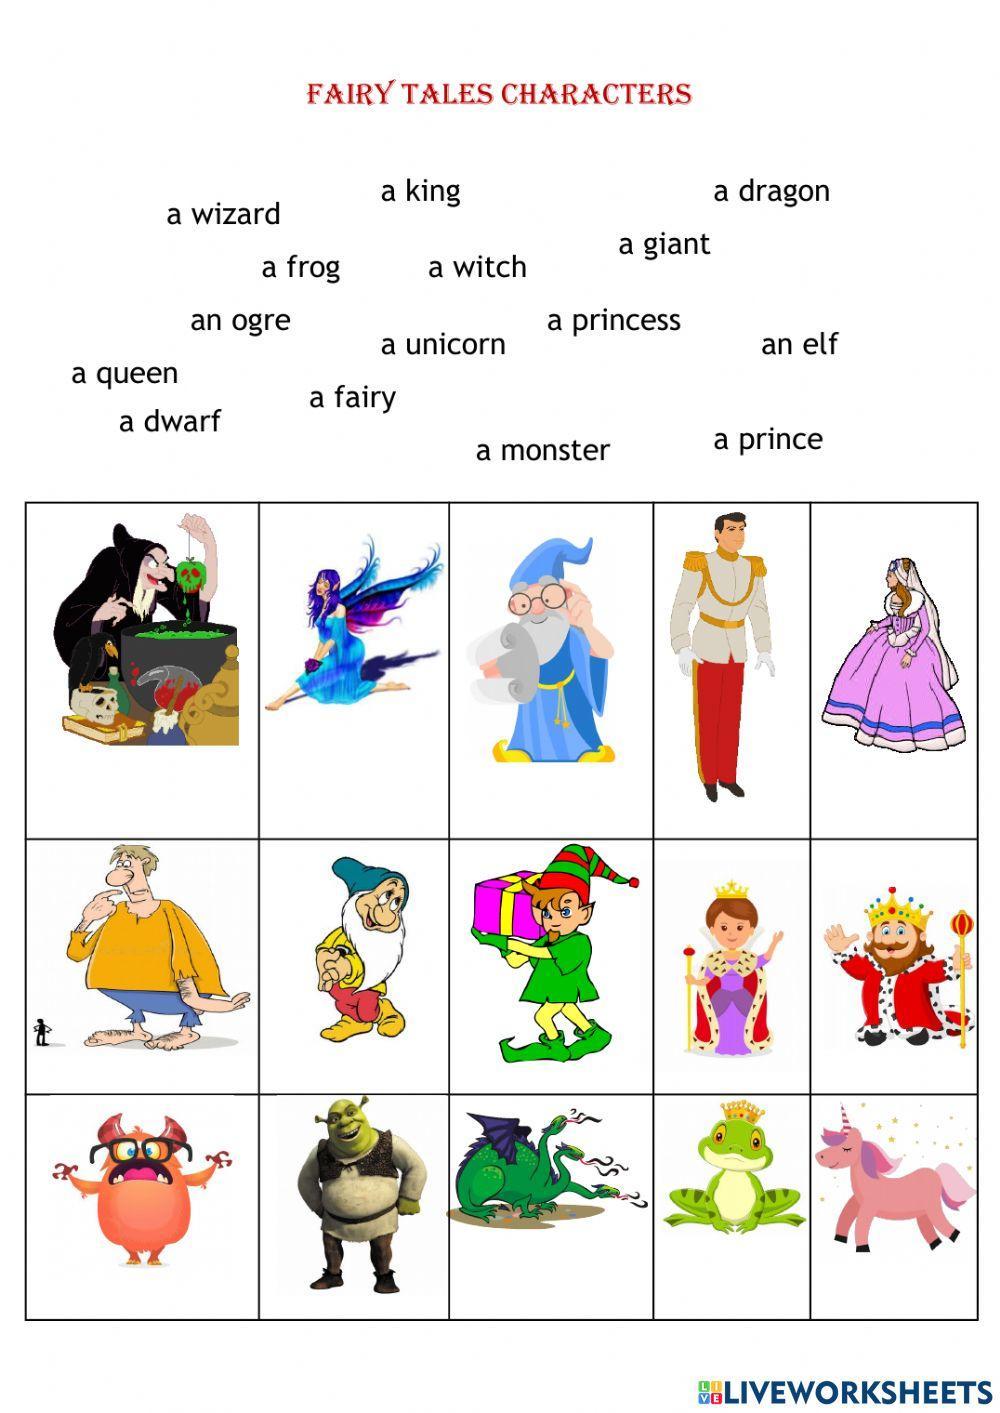 Fairy tale characters (1)